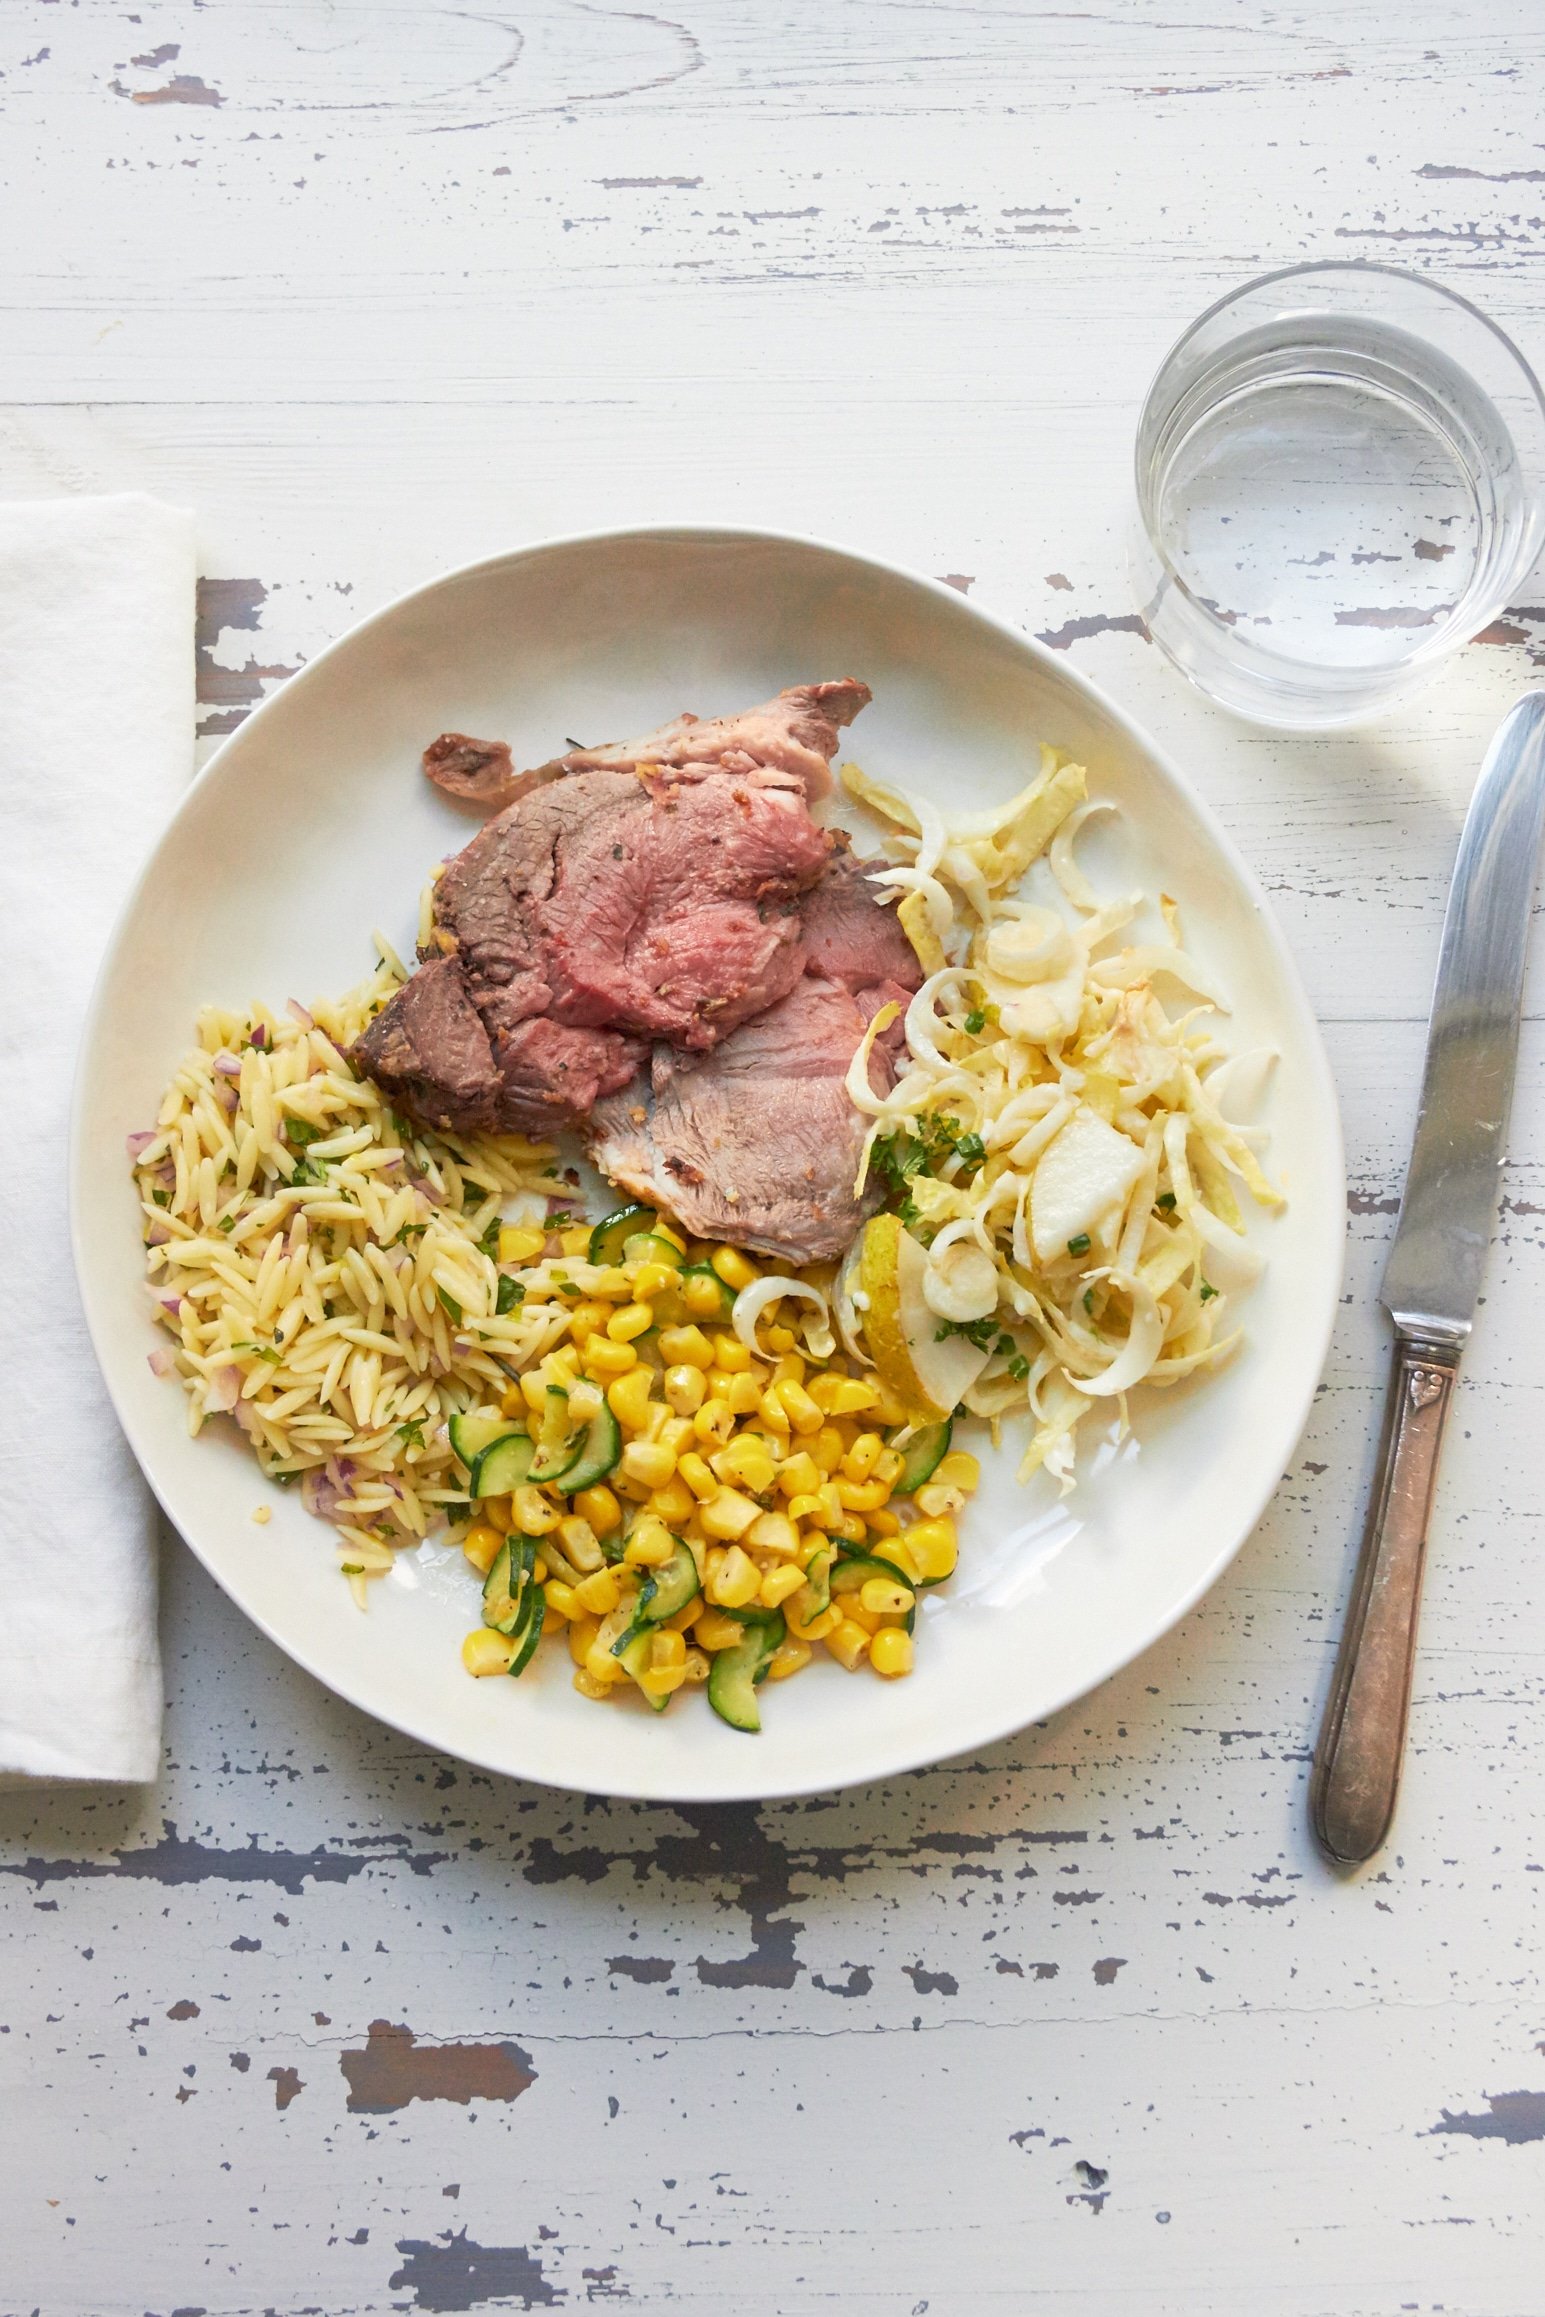 Slices of Roasted Leg of Lamb with Greek Orzo, Creamy Endive Salad and Sauteed Corn sides on plate.